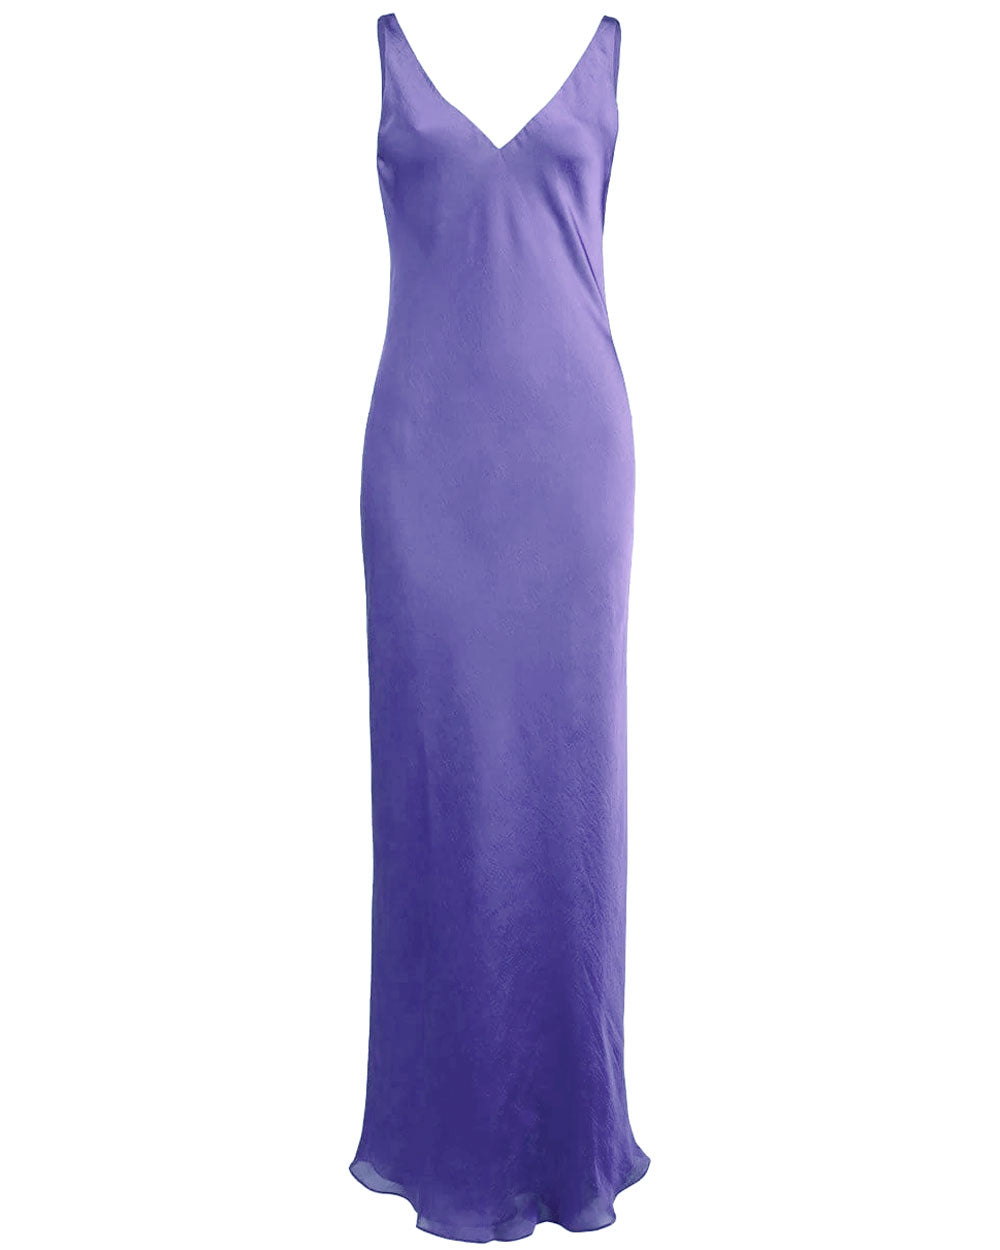 Periwinkle Low Back Maxi Dress